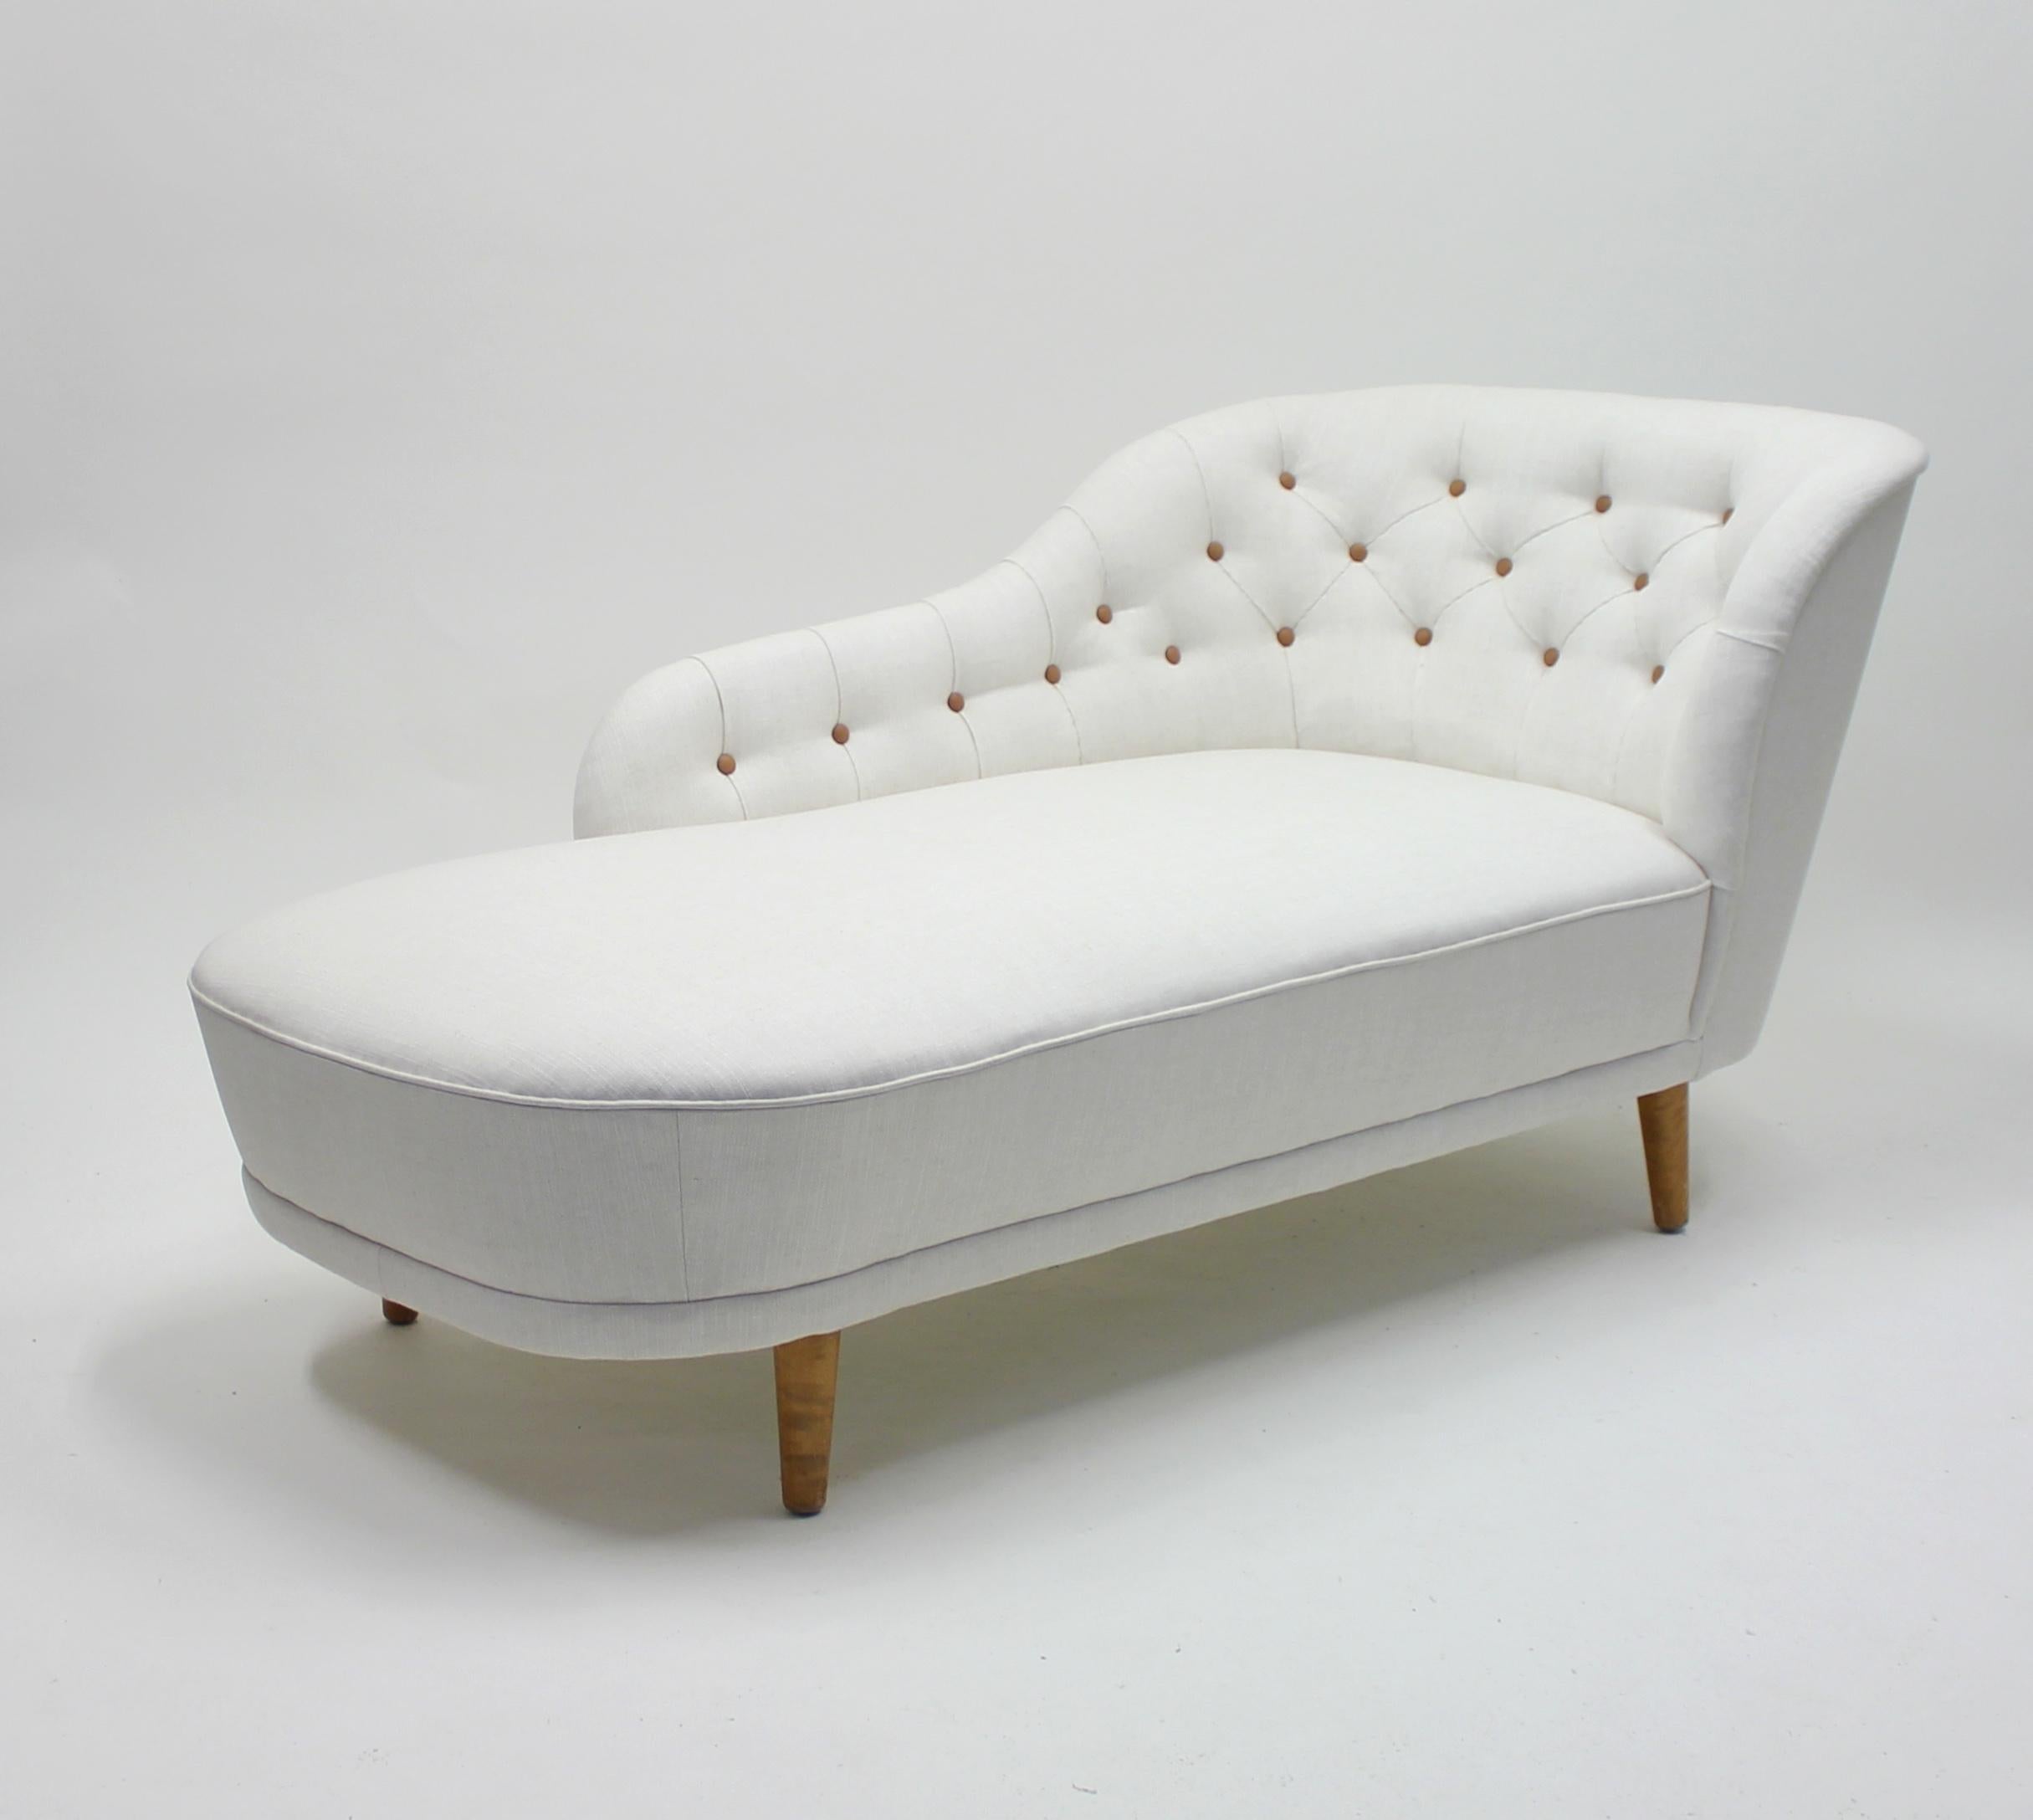 Rare chaise lounge, attributed to Swedish designer Greta Magnsusson Grossman for her own firm Studio. Made in the 1940s. New white linen upholstery with brown leather buttons in the backrest. Stained birch legs. Very good condition with new padding